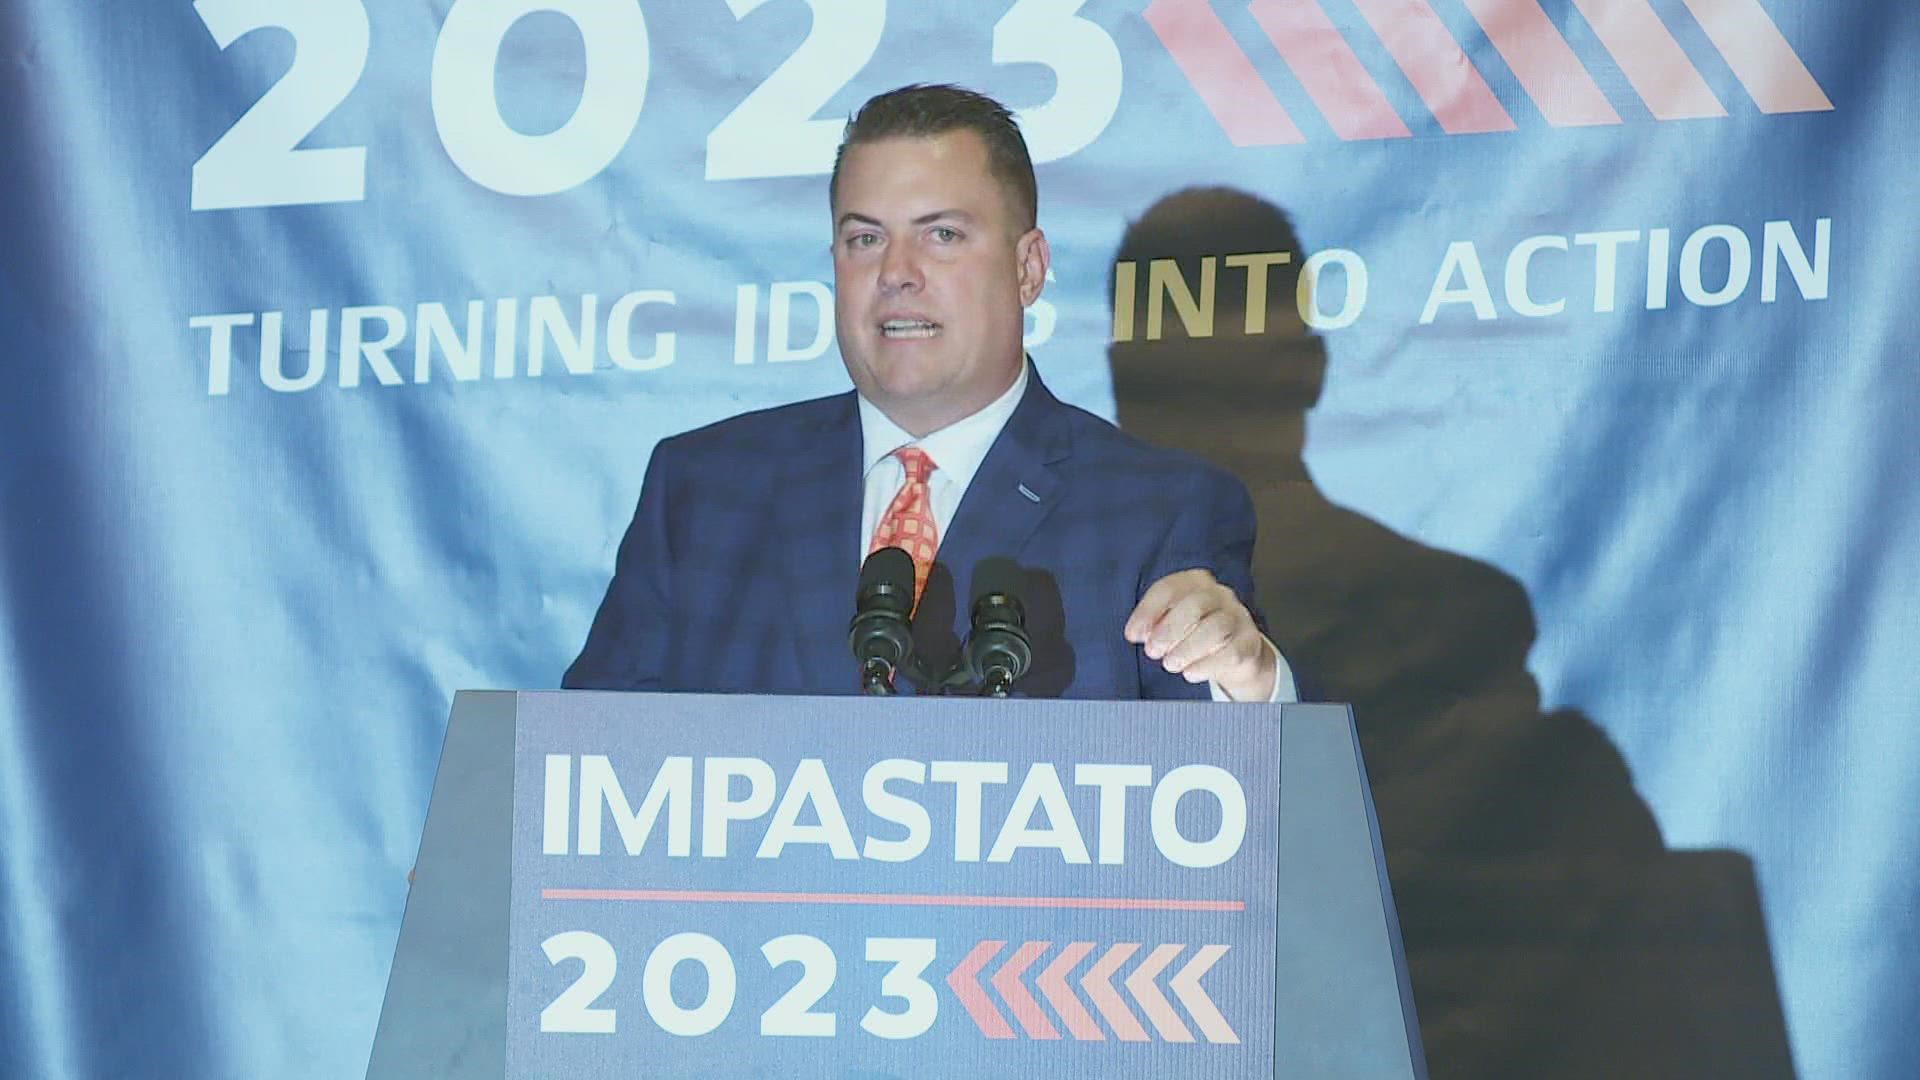 “I’m not running against anyone. I’m running for the seat to serve the citizens of Jefferson Parish,” Impastato said.